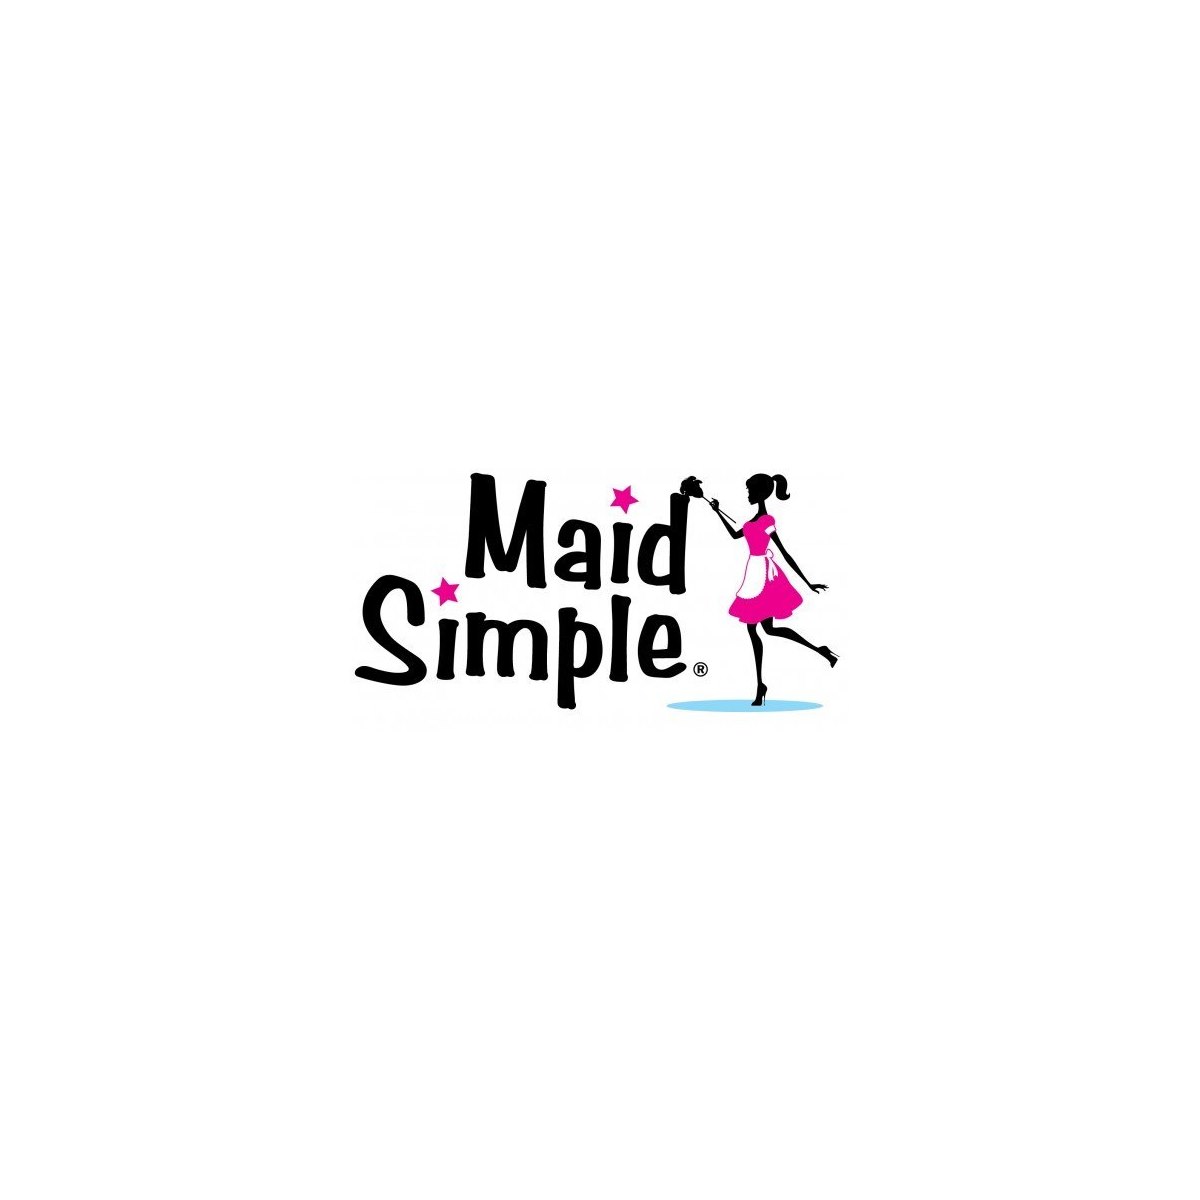 Where to Buy Maid Simple Products